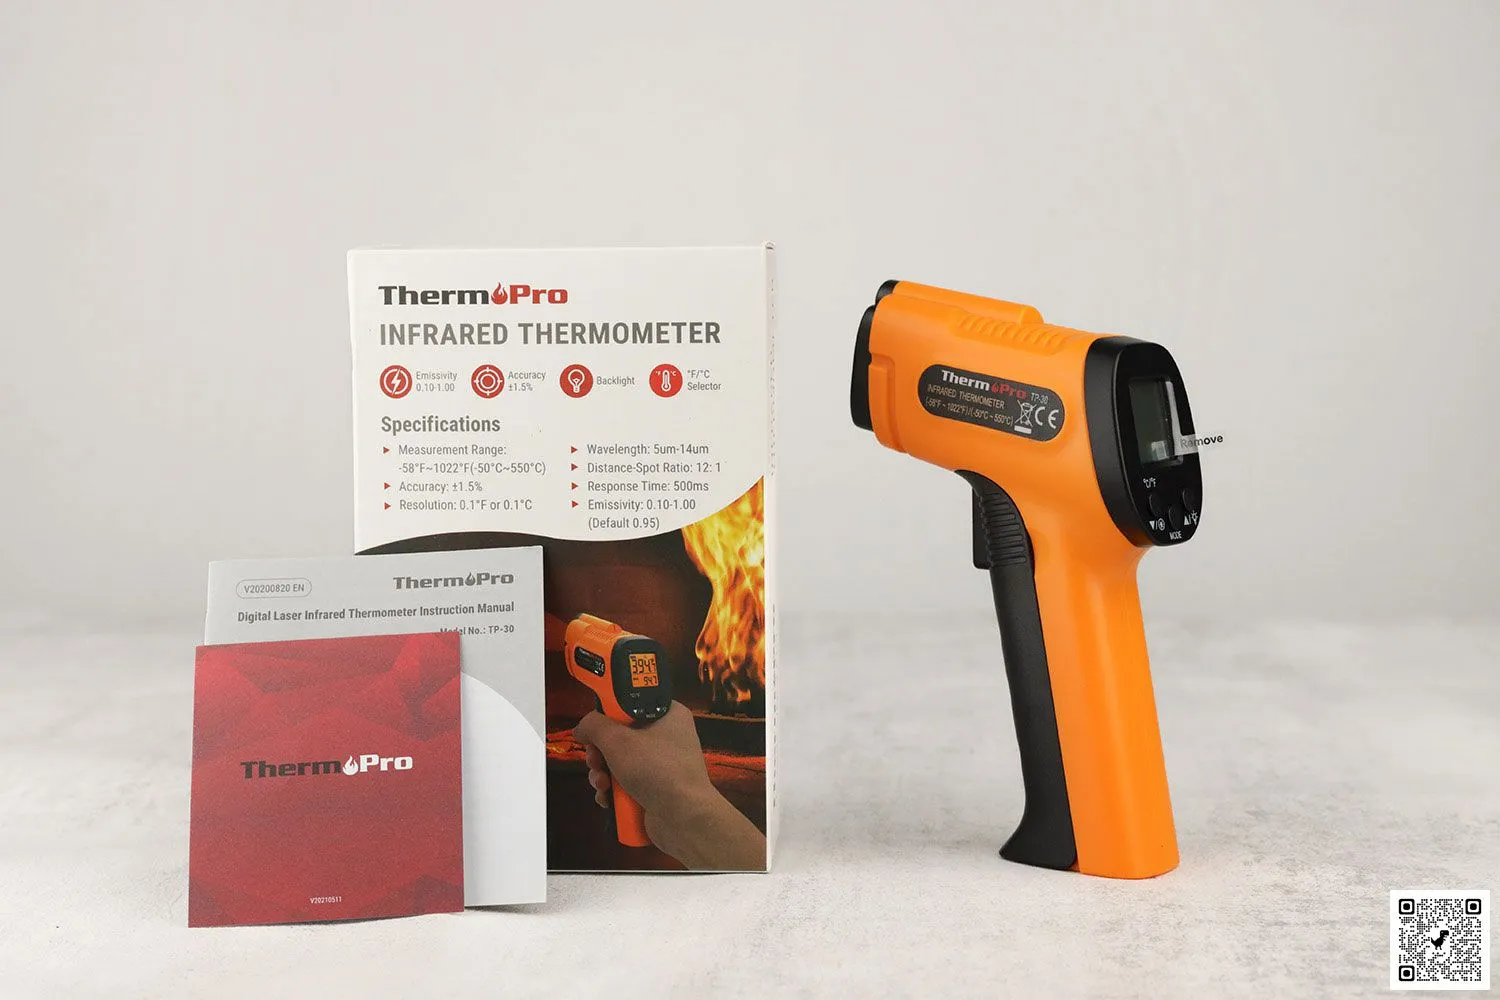 https://cdn.healthykitchen101.com/reviews/images/thermometers/thermopro-tp-30-digital-infrared-thermometer-box-clicsd0q50005b4881wgg862x.jpg